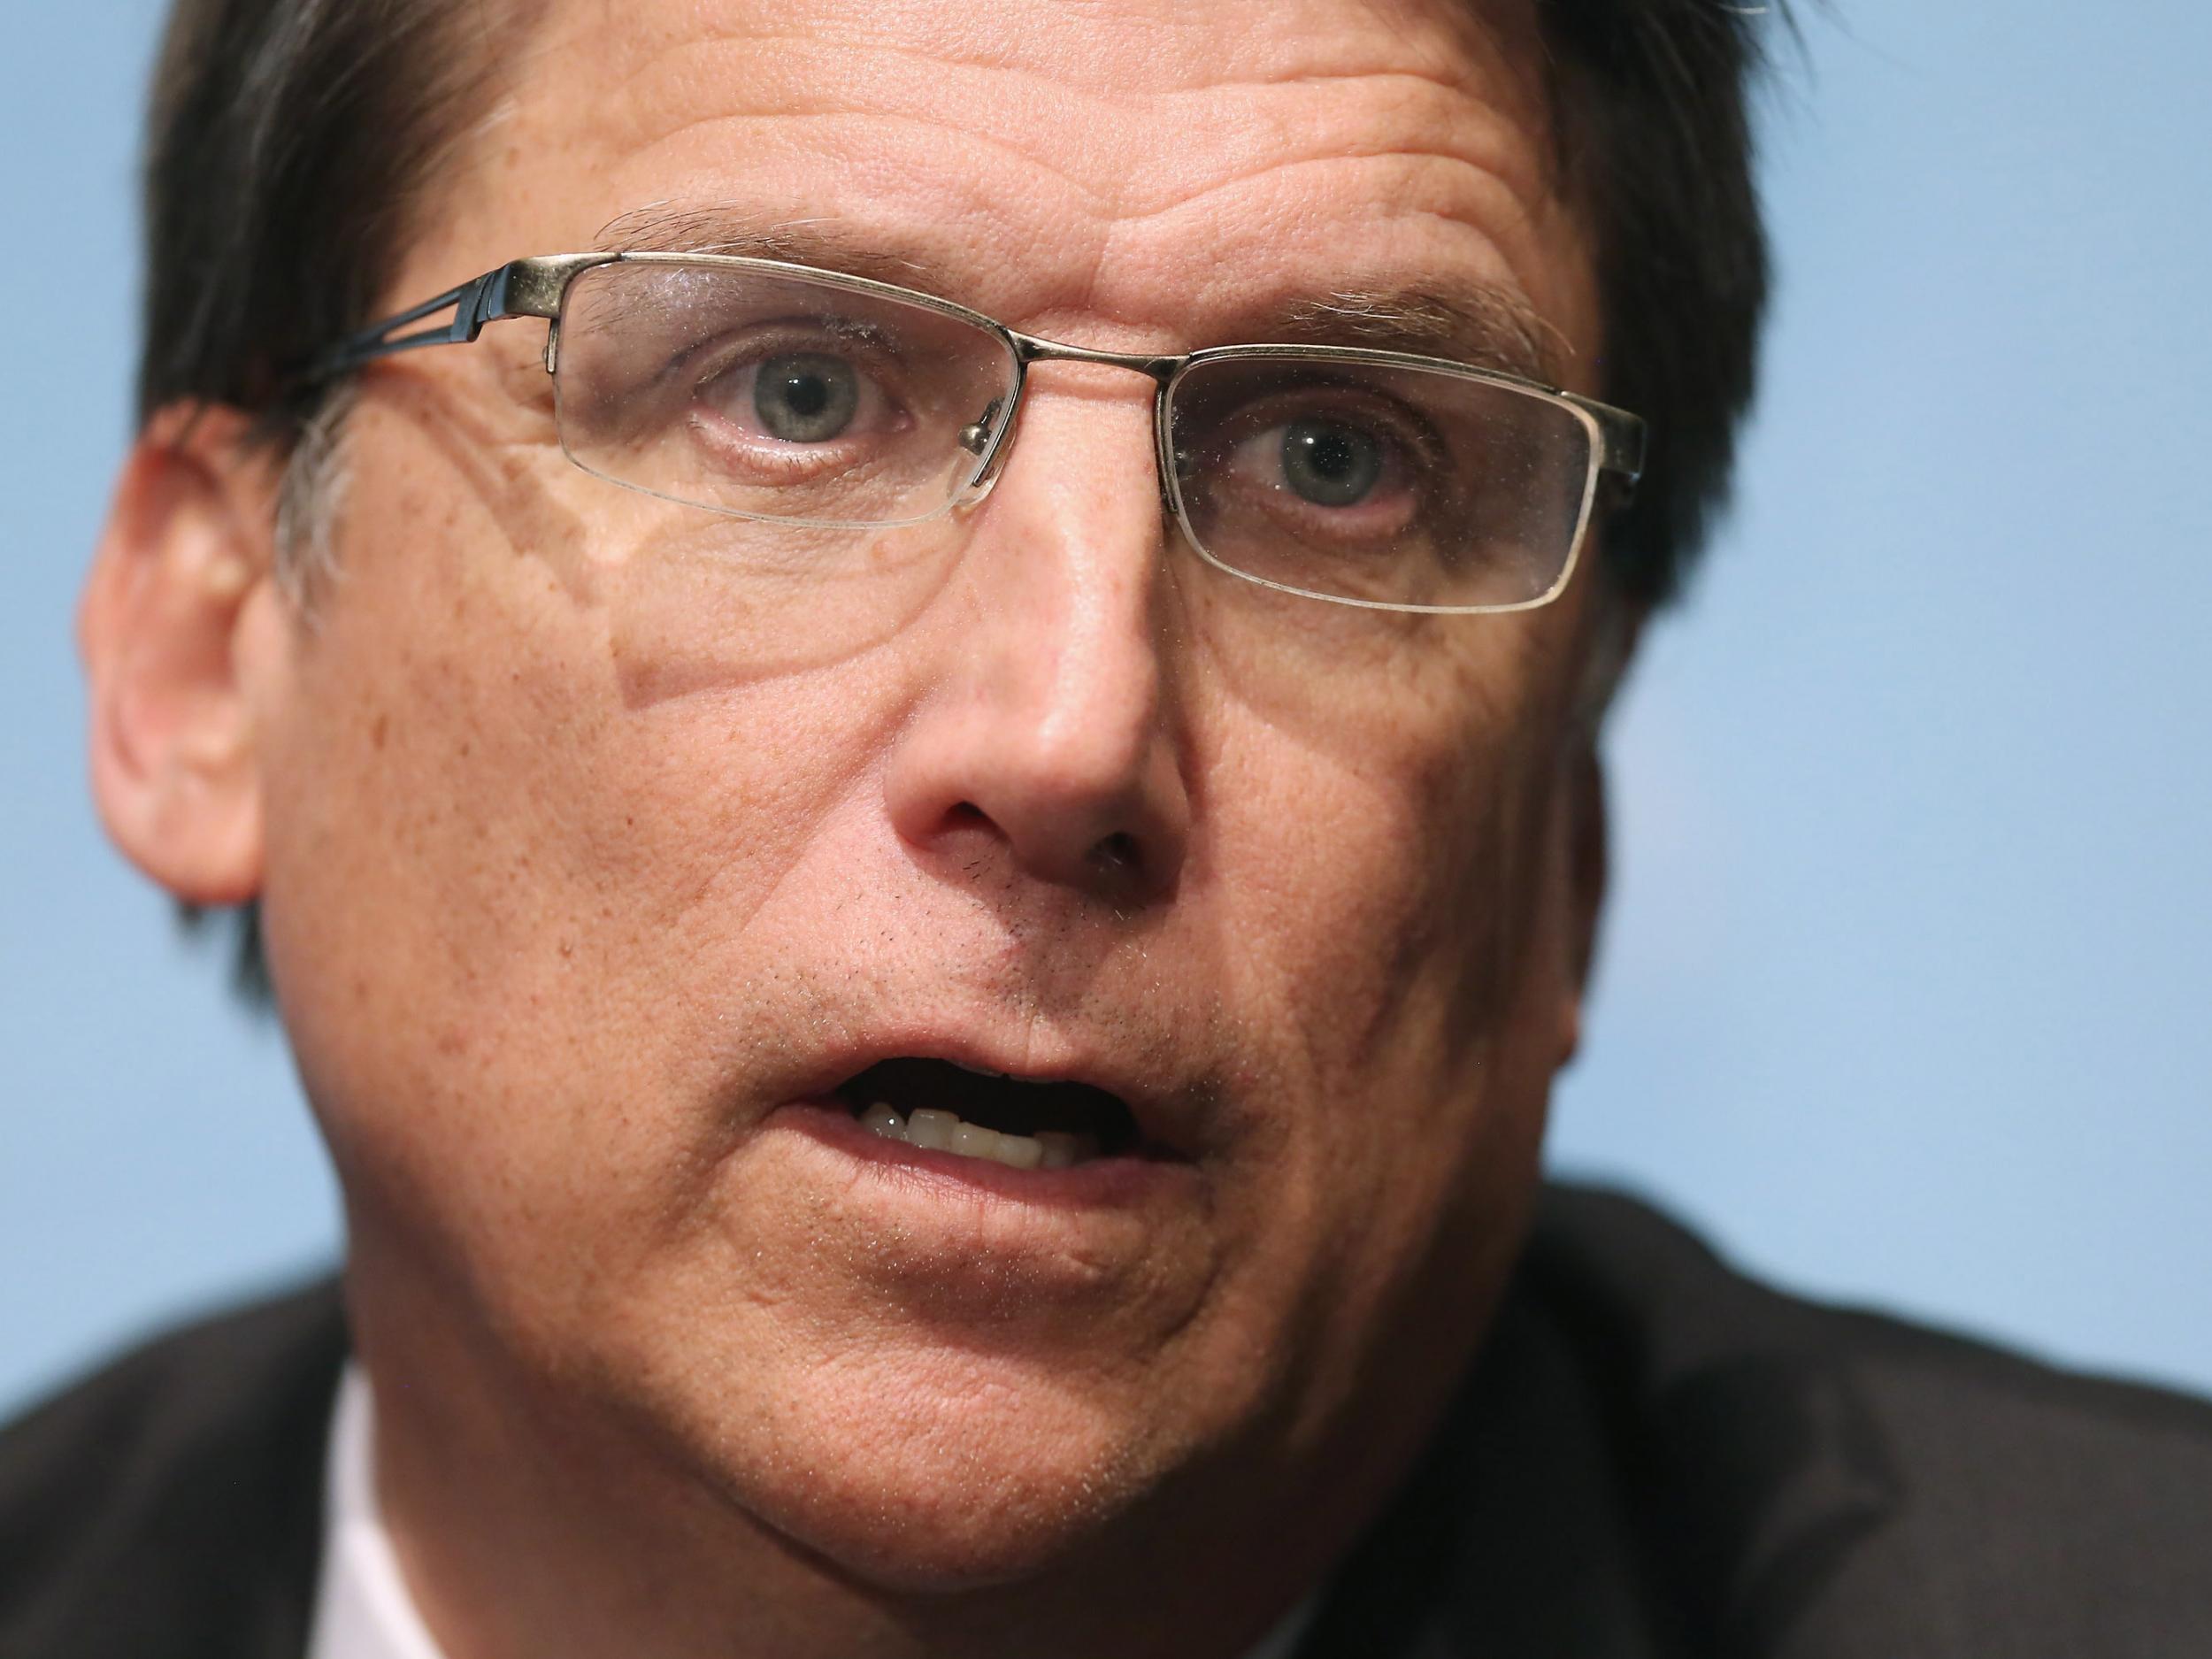 Mr McCrory said it had been an 'honour' to be governor